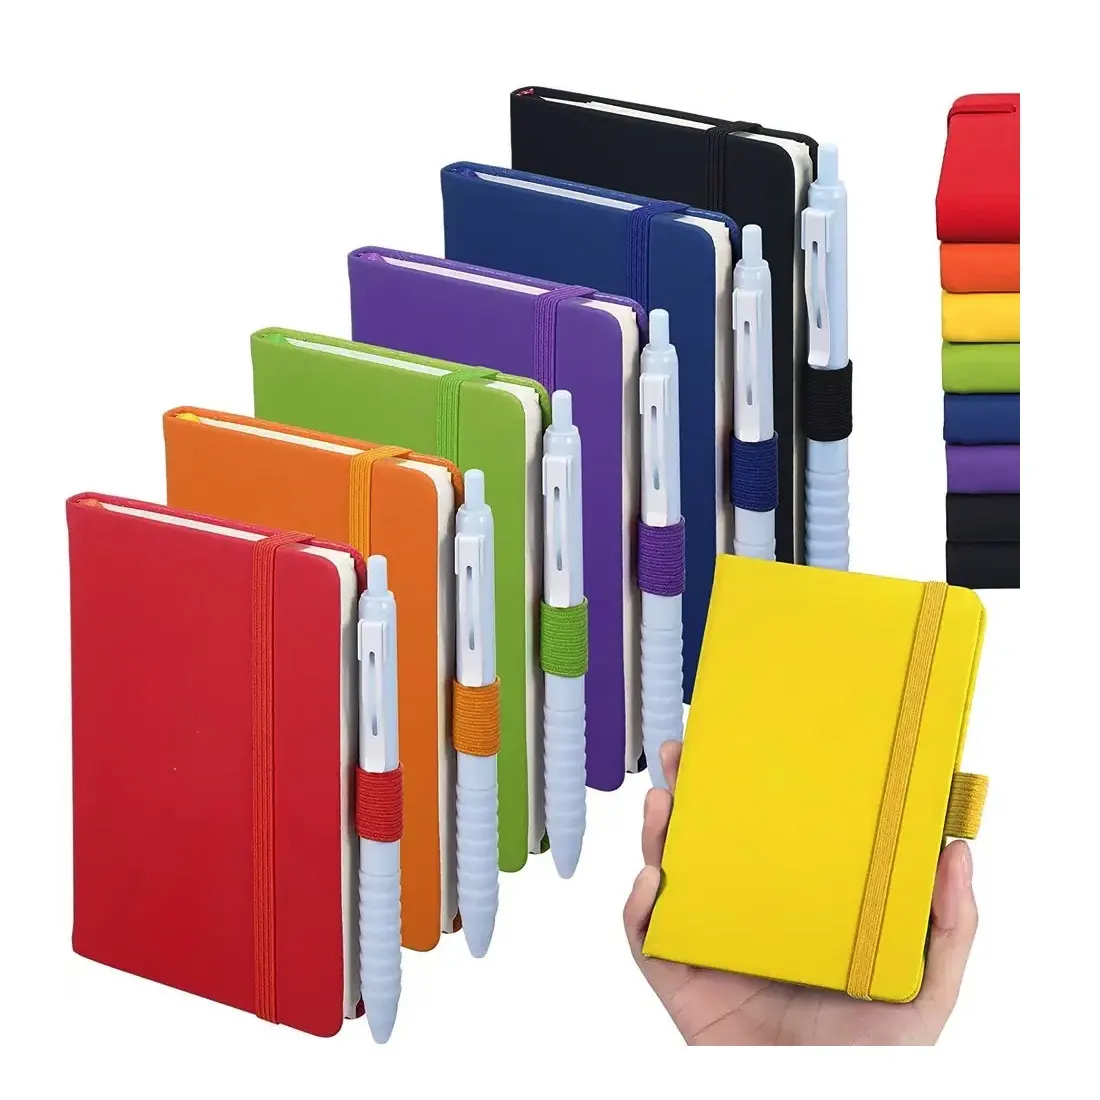 Custom logo sublimation blanks office products promotional corporate gift gifts items set sets A5 A4 B5 sizes leather notebook